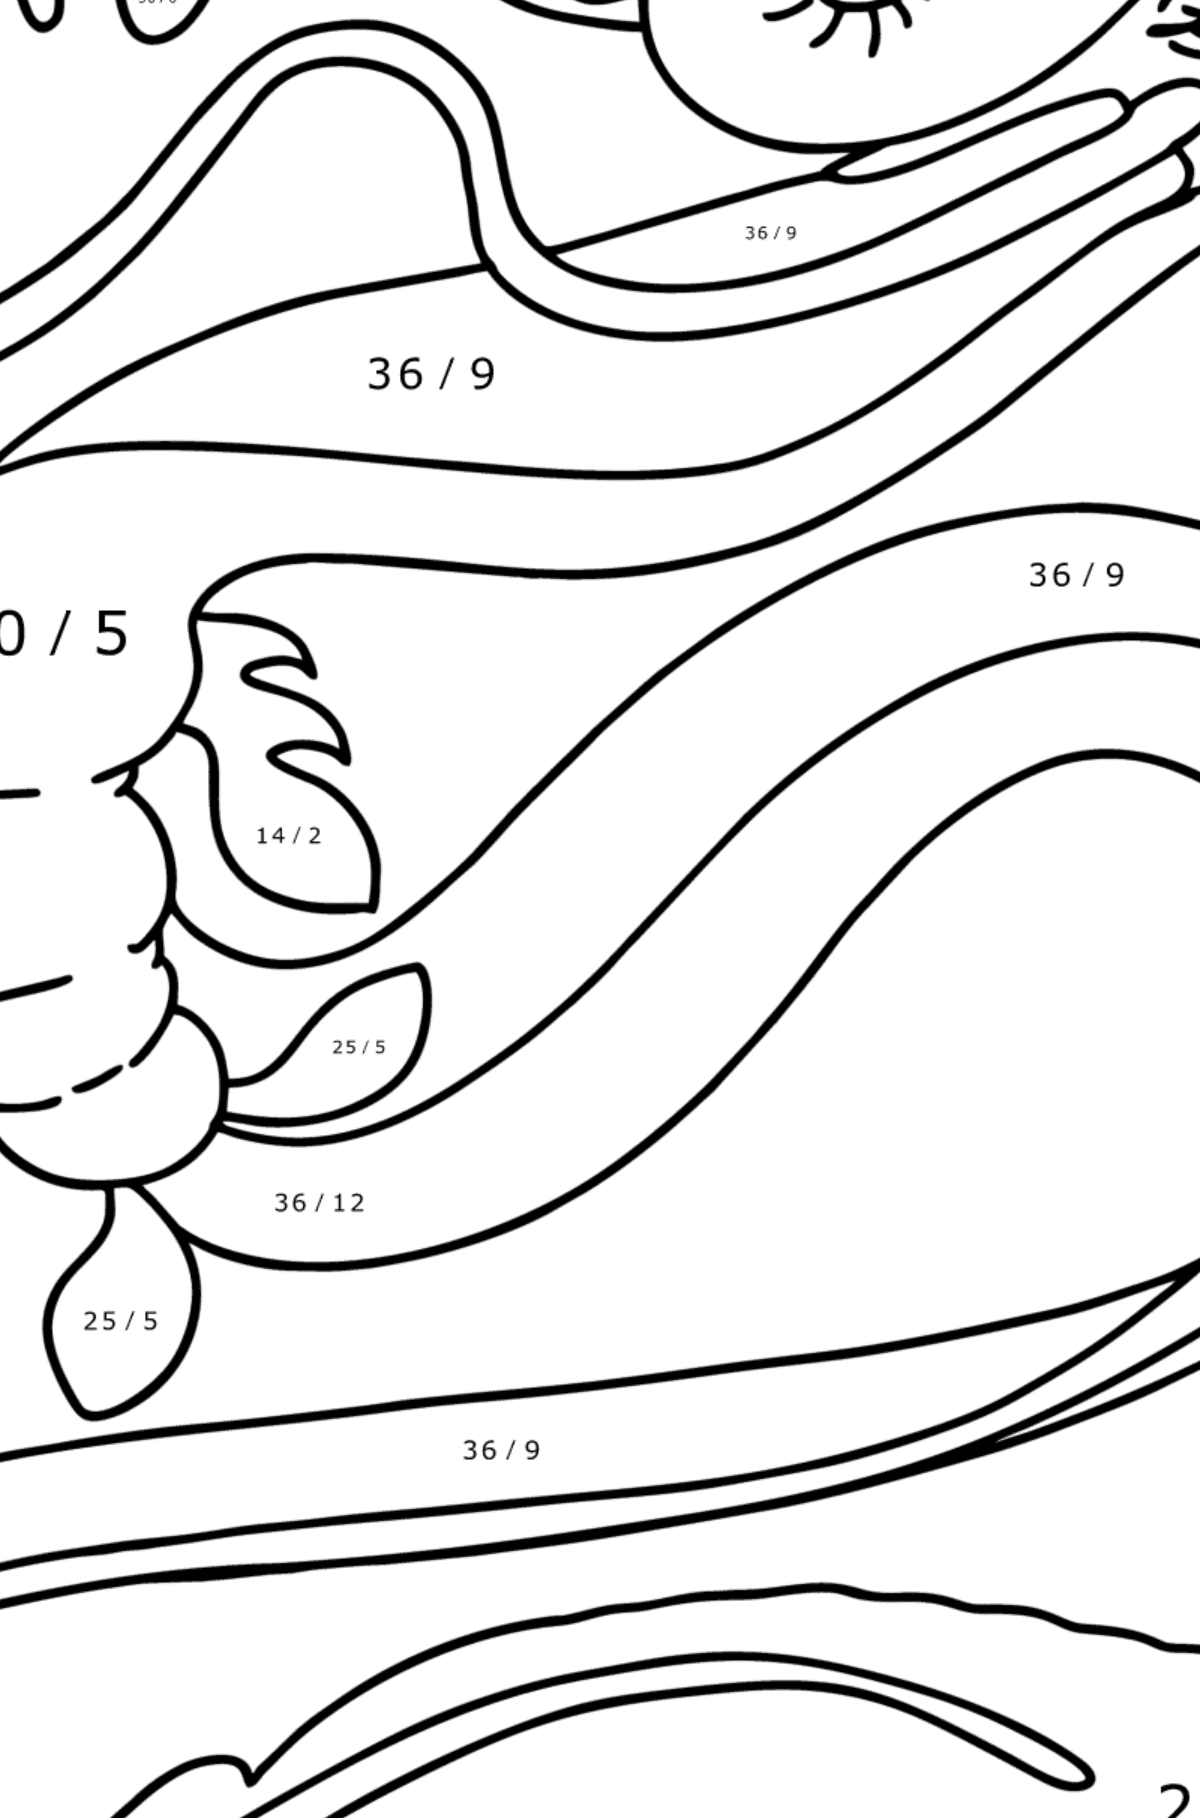 Snake Dragon coloring page - Math Coloring - Division for Kids